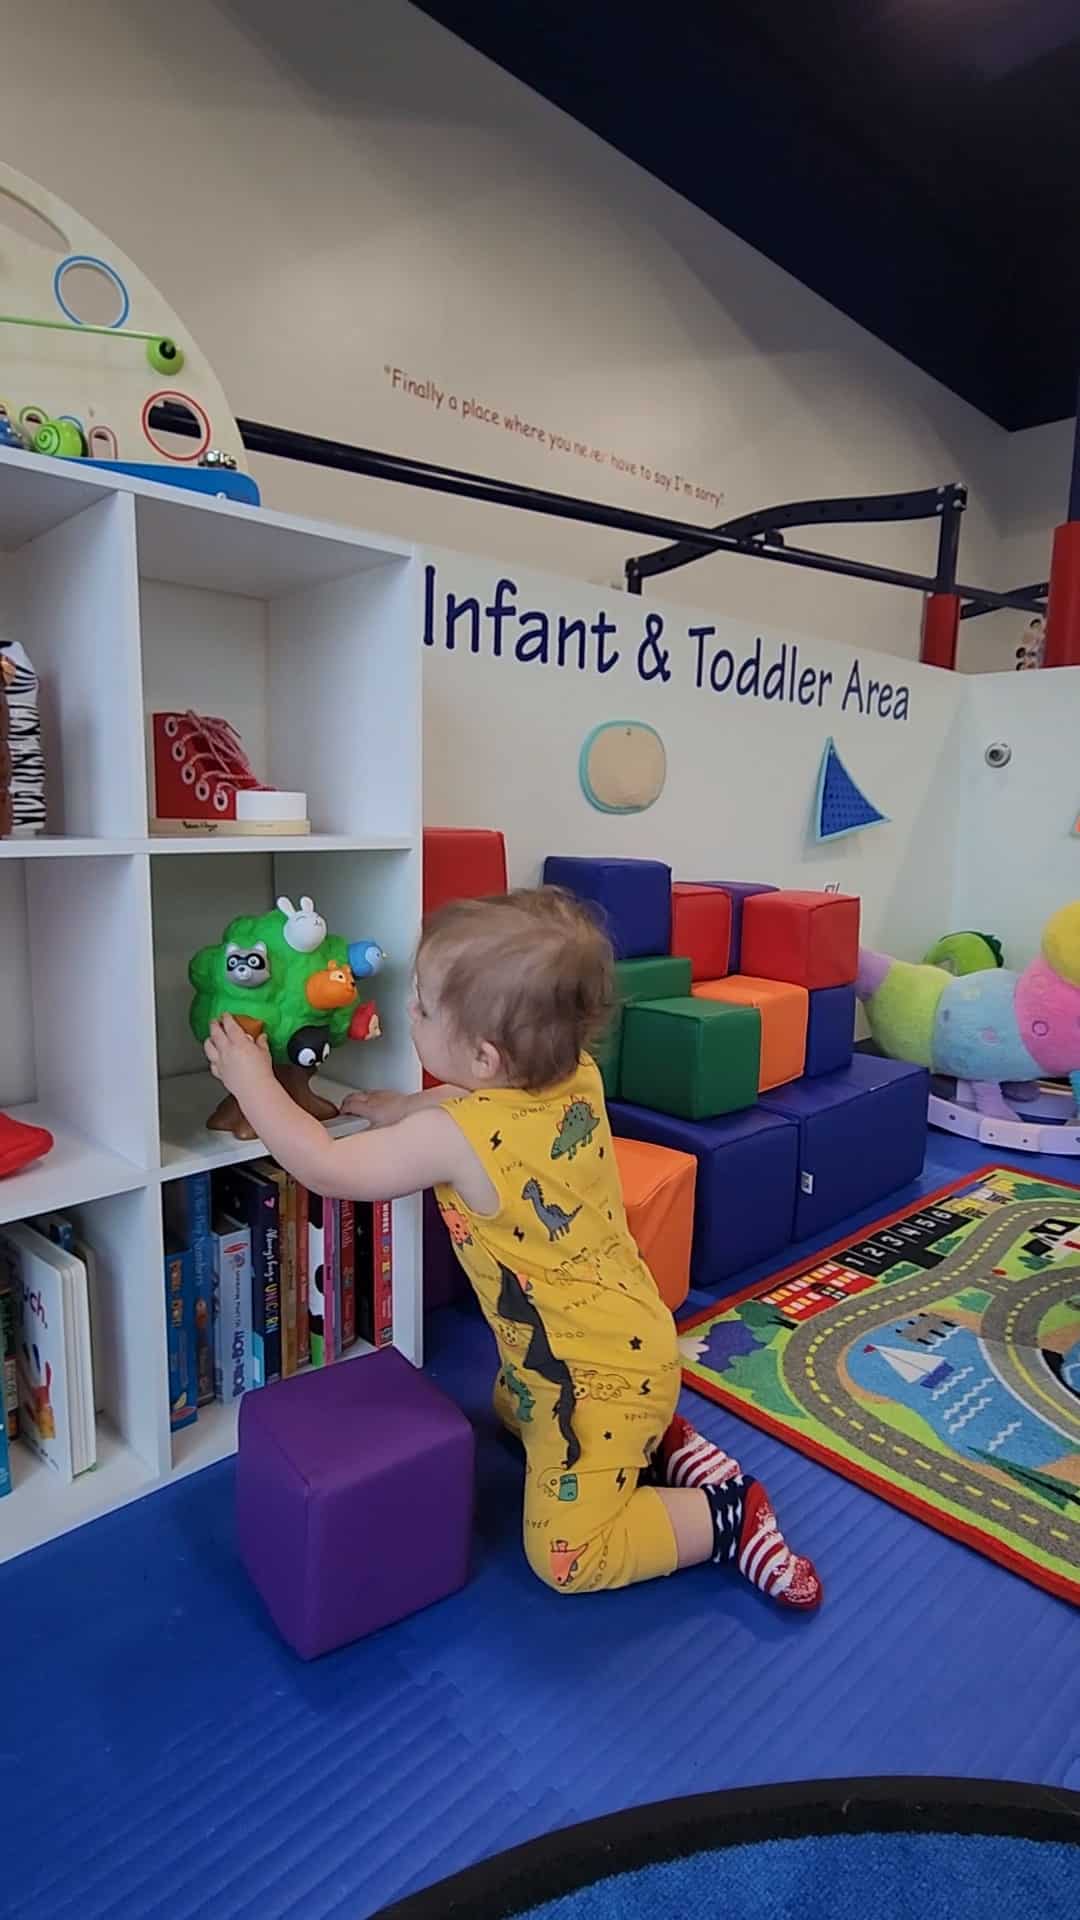 A toddler in a dinosaur-print outfit is selecting toys from a shelf in the Infant & Toddler Area of an indoor play space in Cary, NC, surrounded by colorful soft blocks and a playful rug.